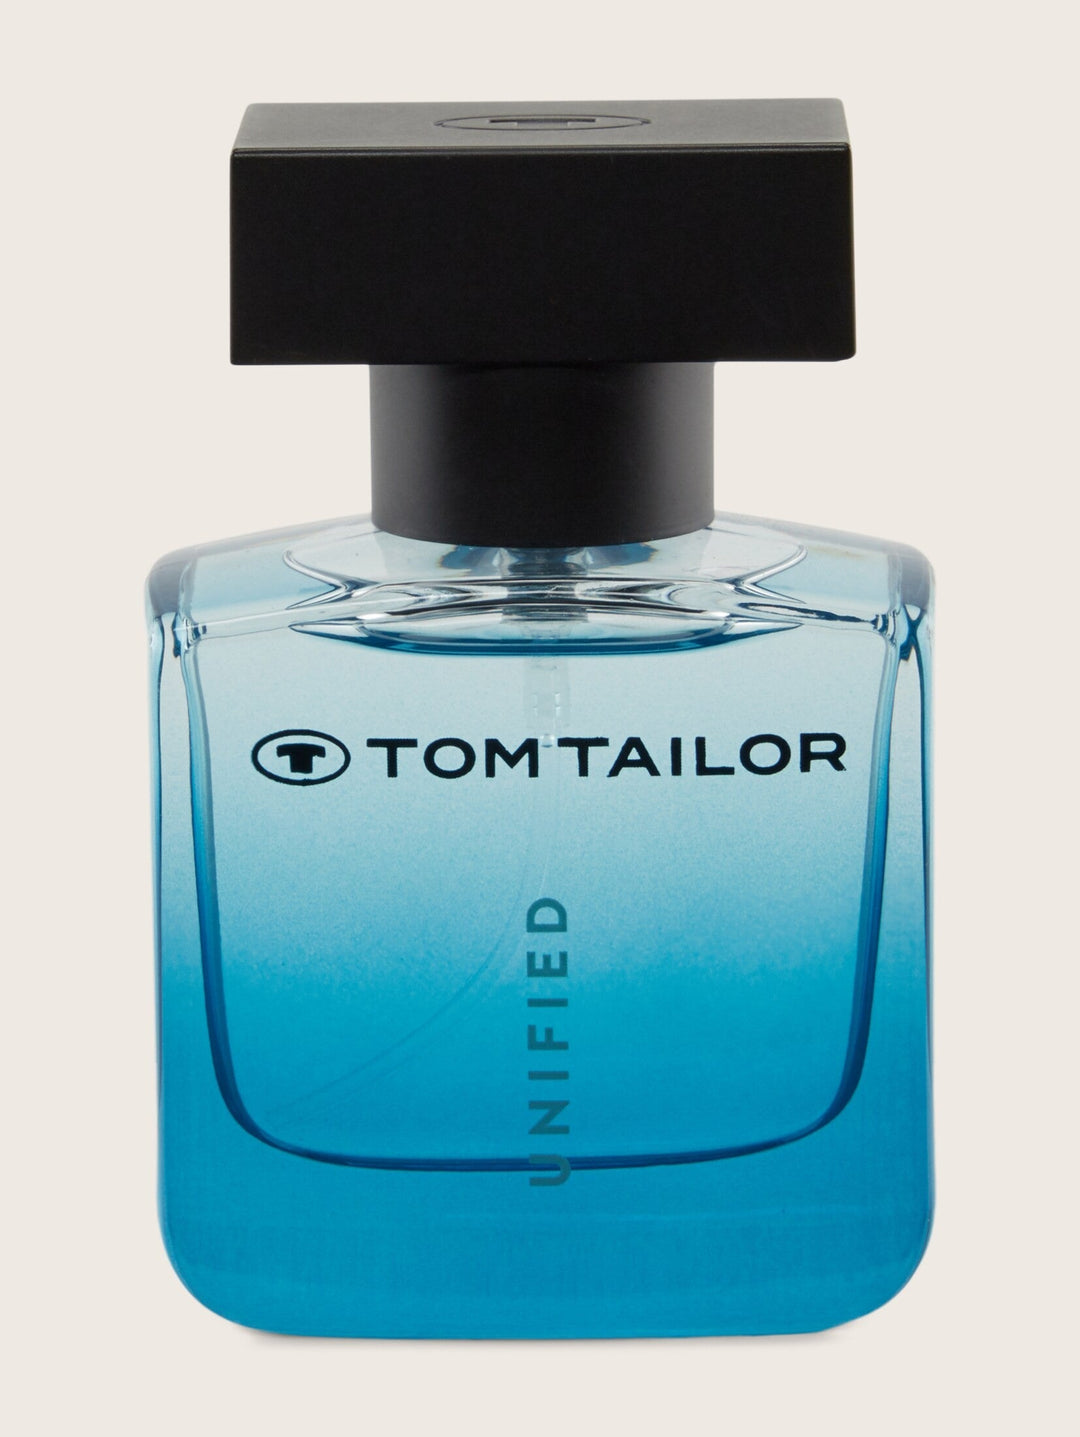 TOM TAILOR UNIFIED MAN EDT 30ML – Square Deal